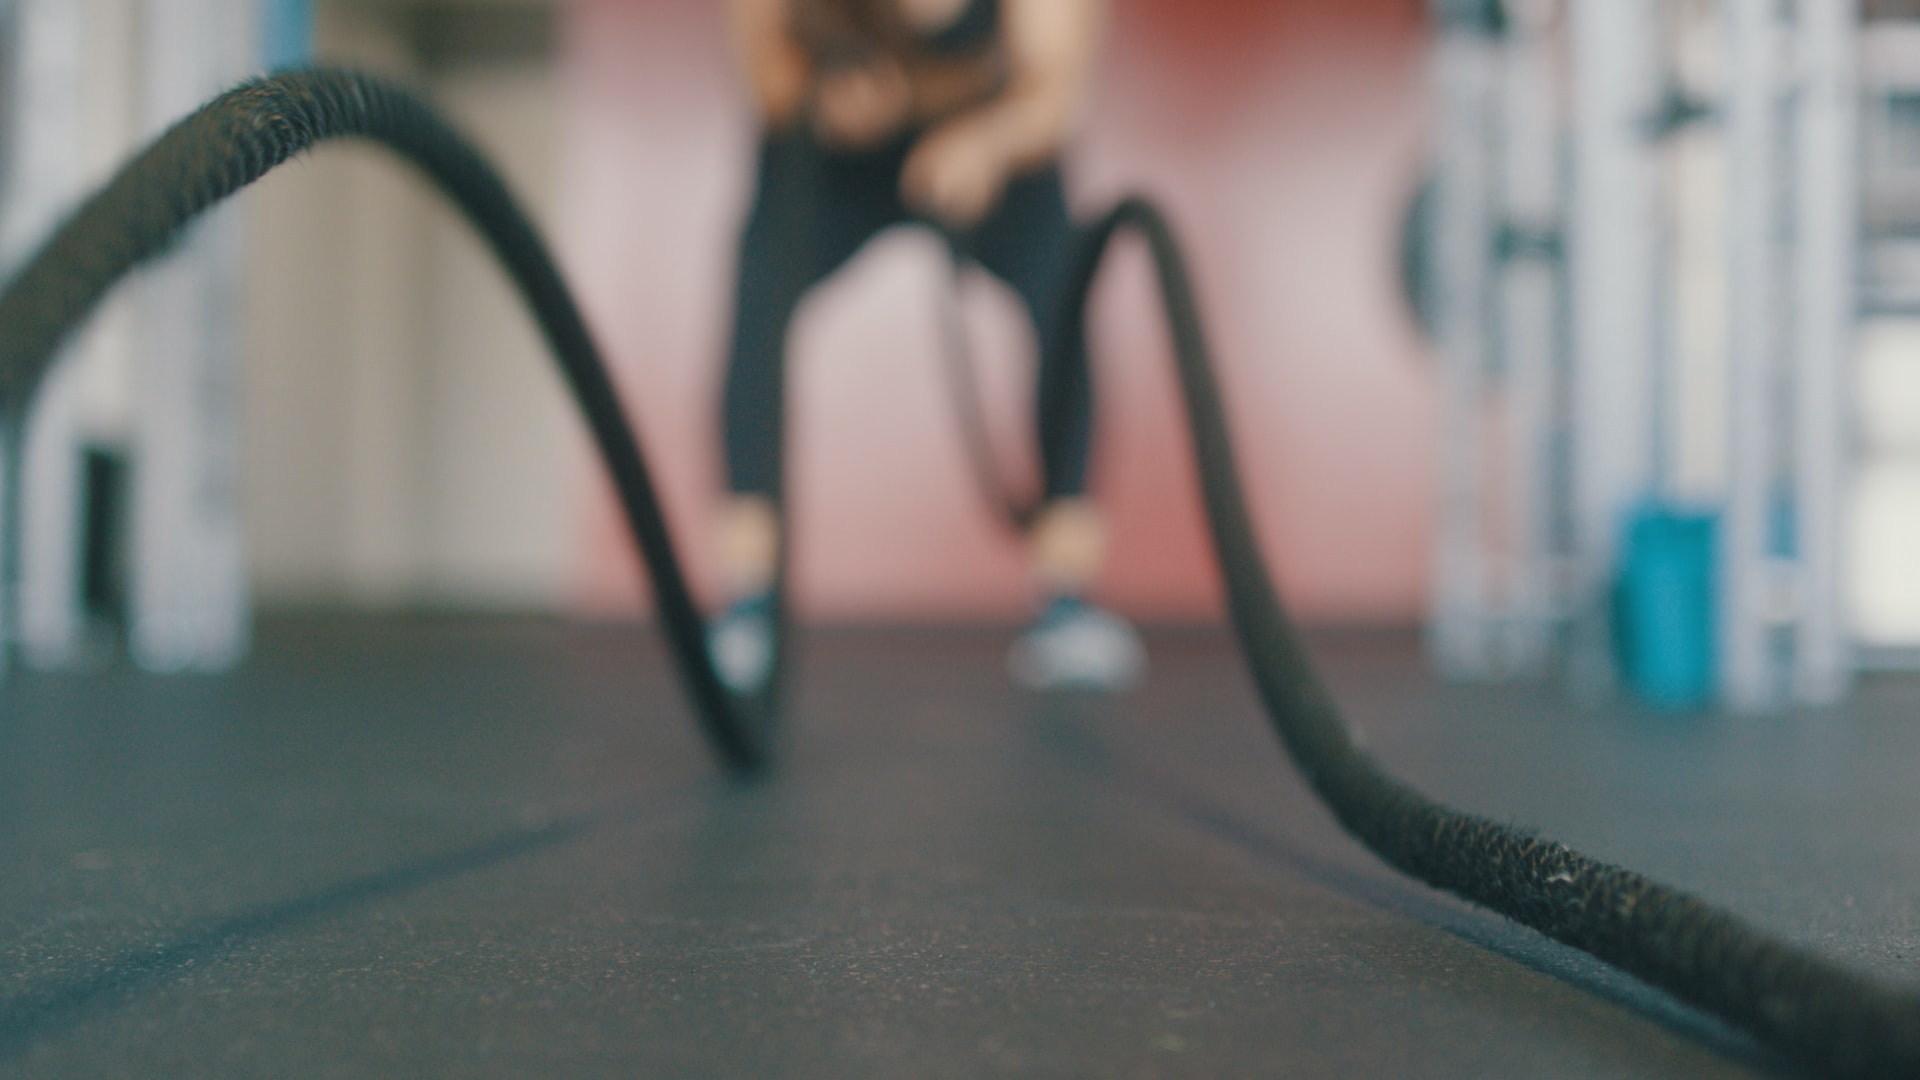 Working out with battle ropes